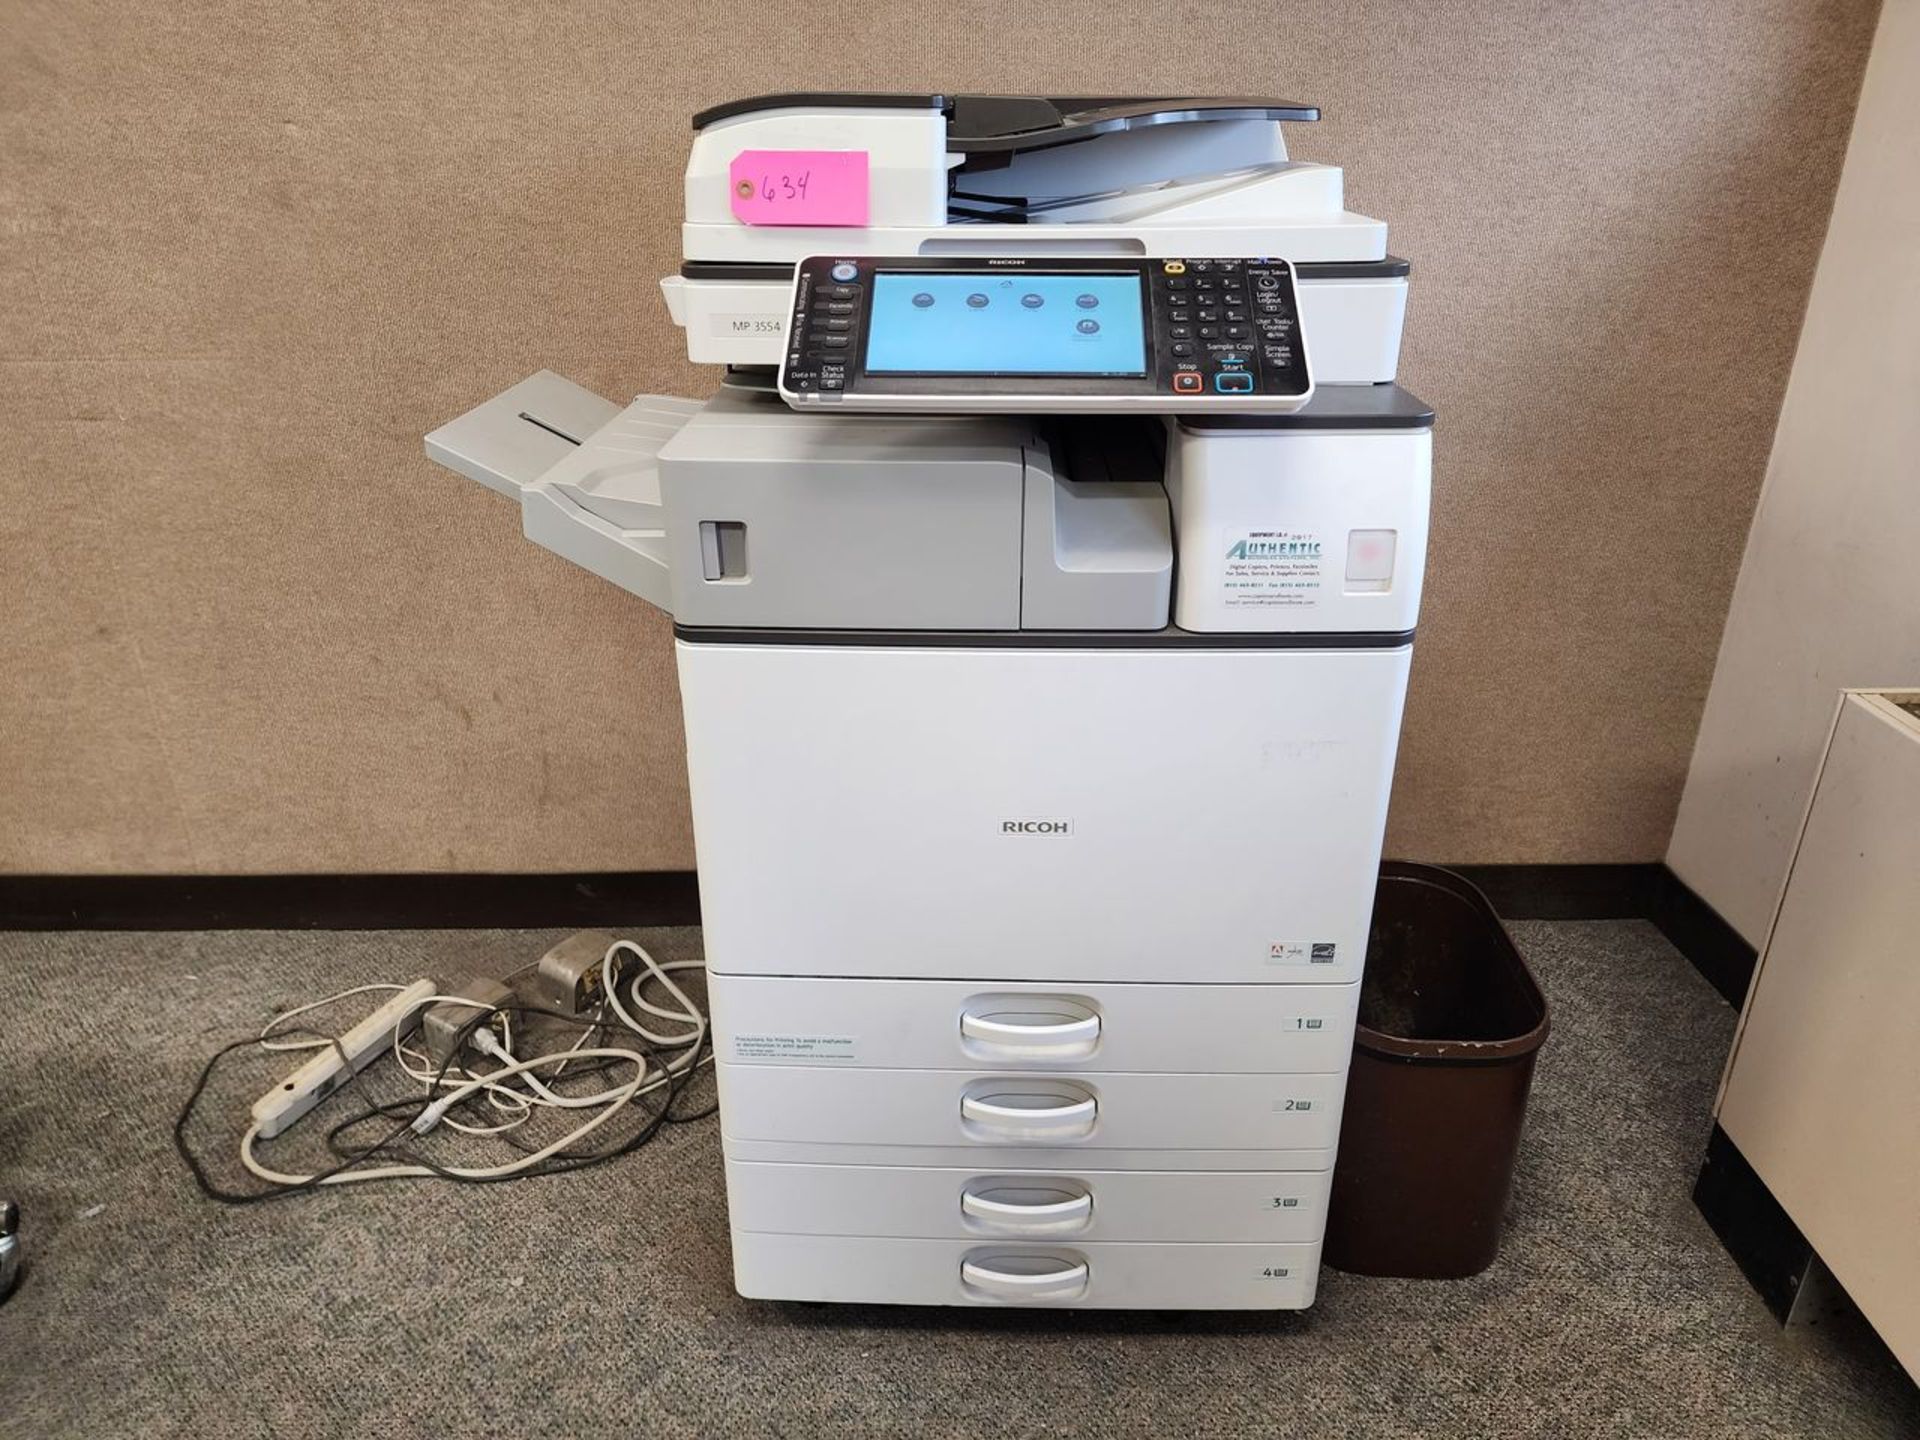 RICOH Model M3554, Black and White Laser Multifunction Print and Copy Machine